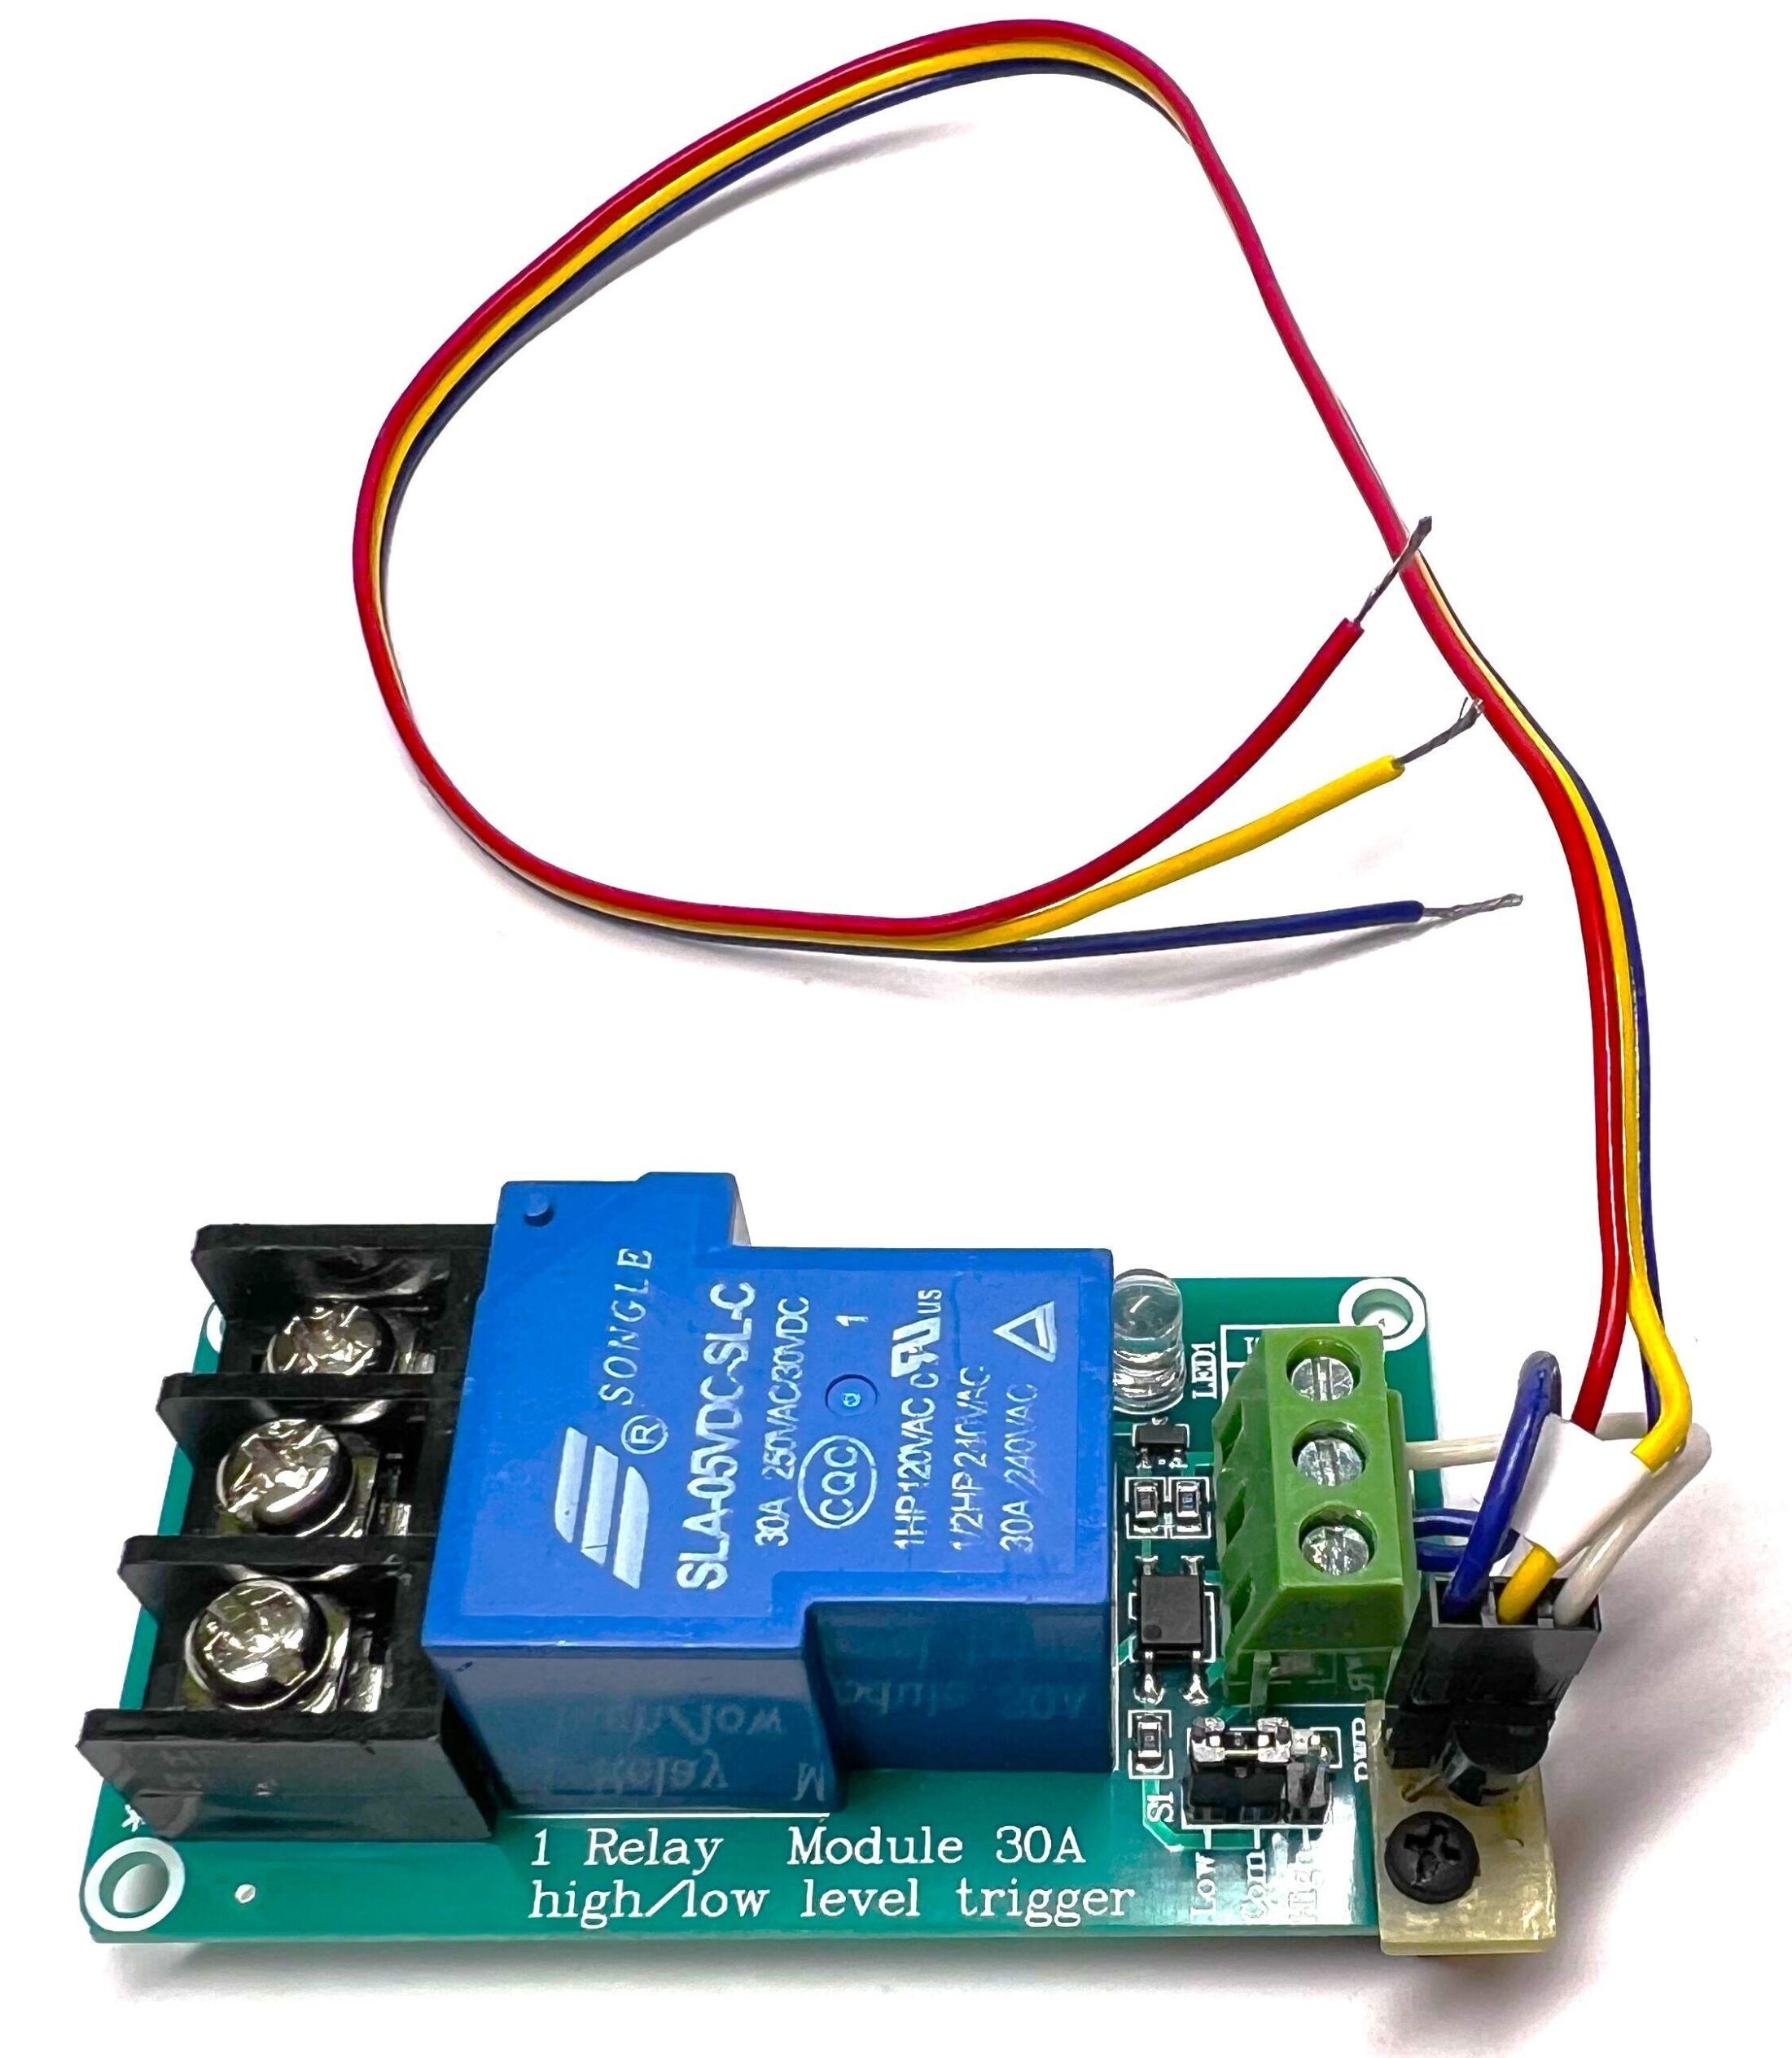 Connected wires to relay and transistor